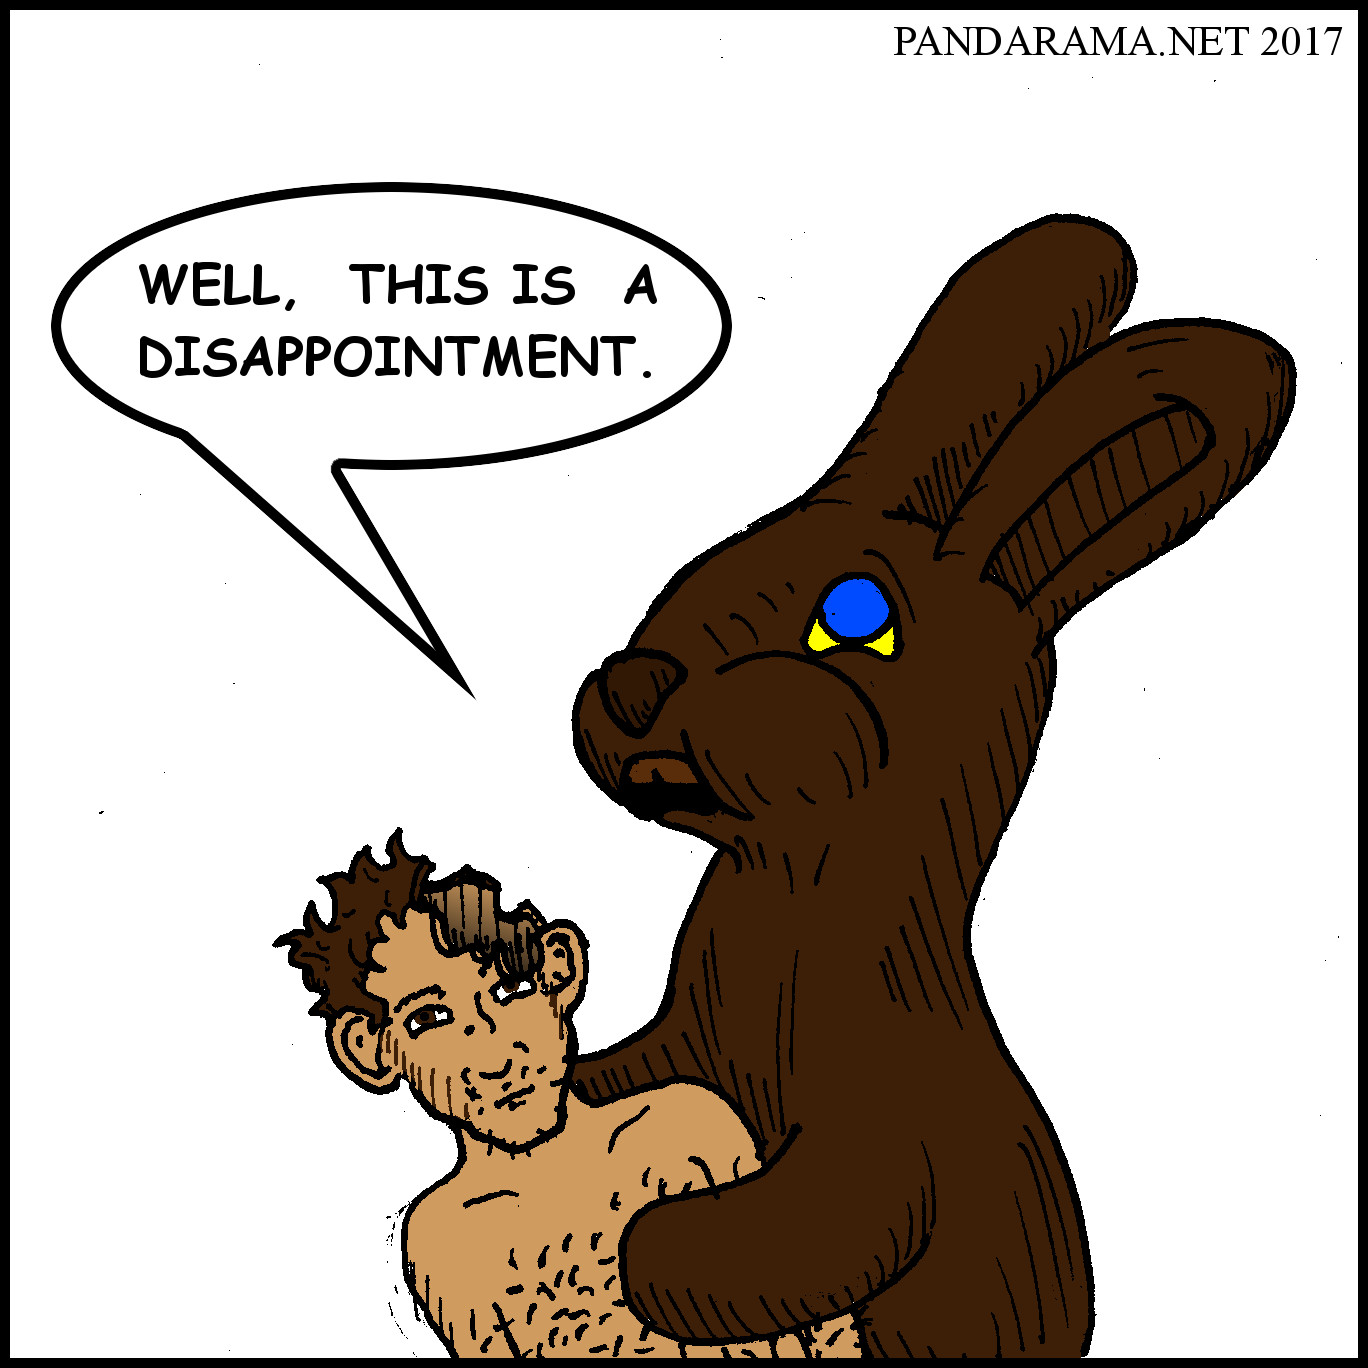 a chocolate bunny bites a person and is disappointed to find it's hollow.